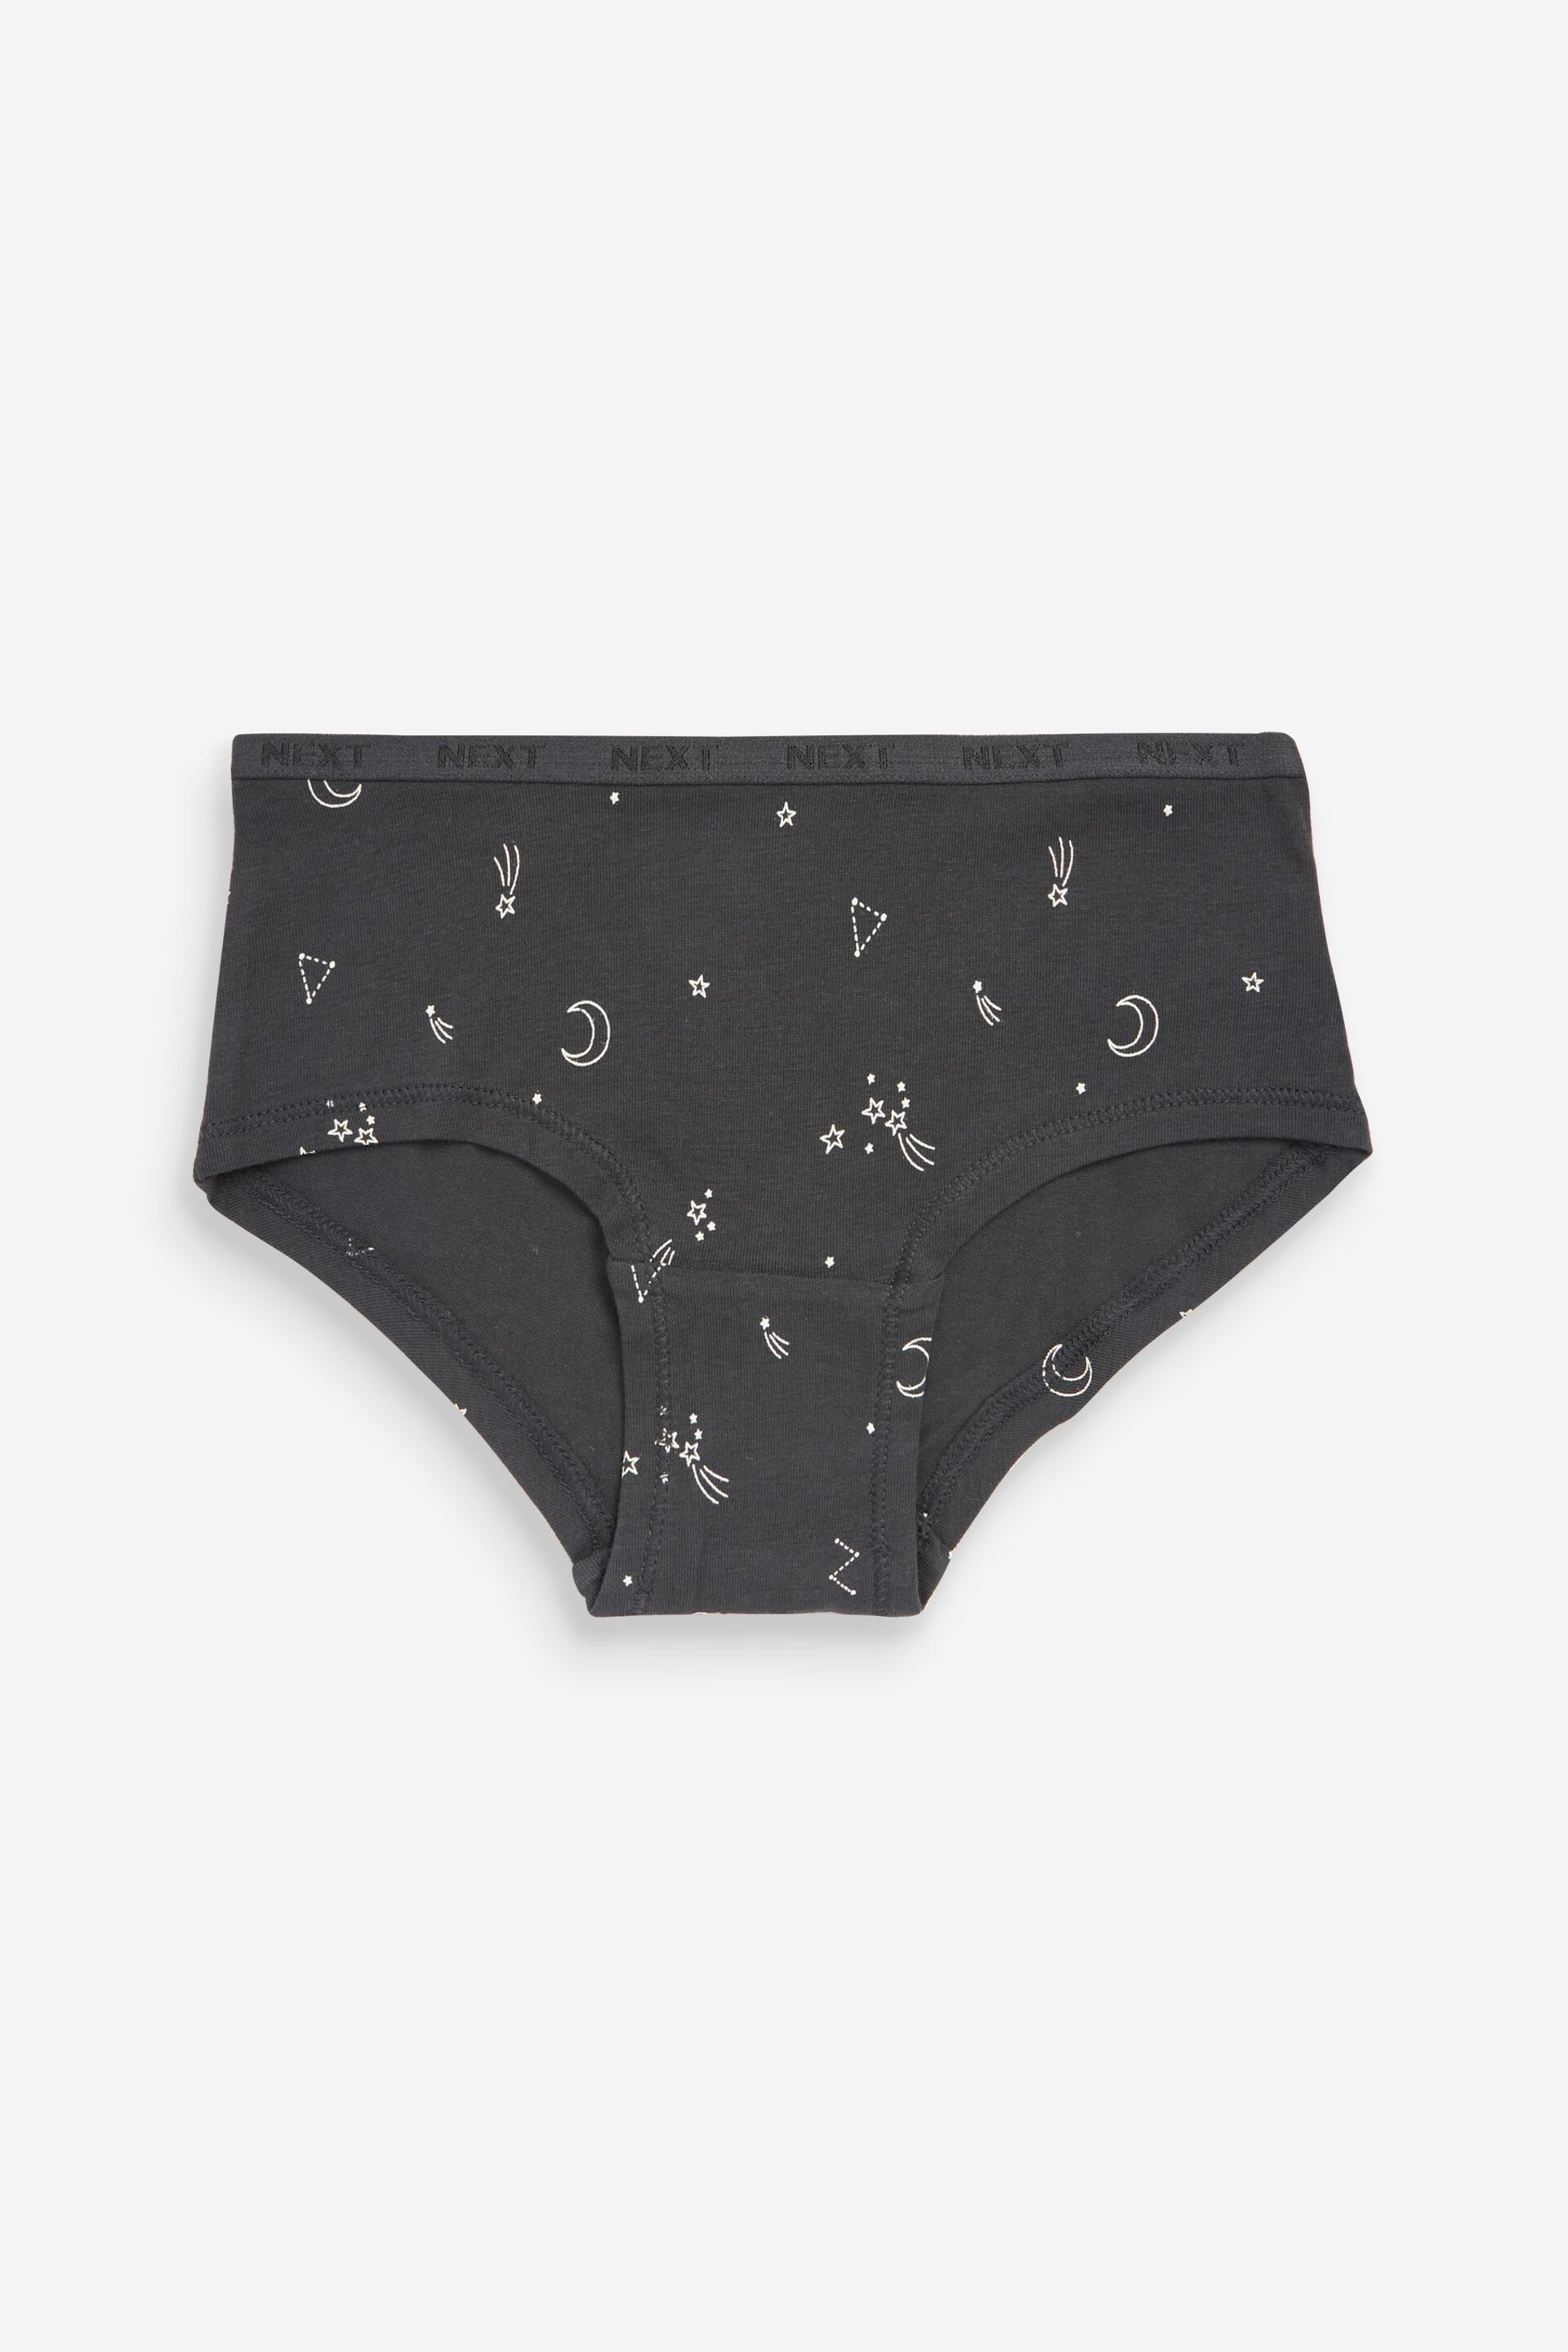 Grey Hearts Hipster Briefs 5 Pack (2-16yrs) - Image 5 of 8